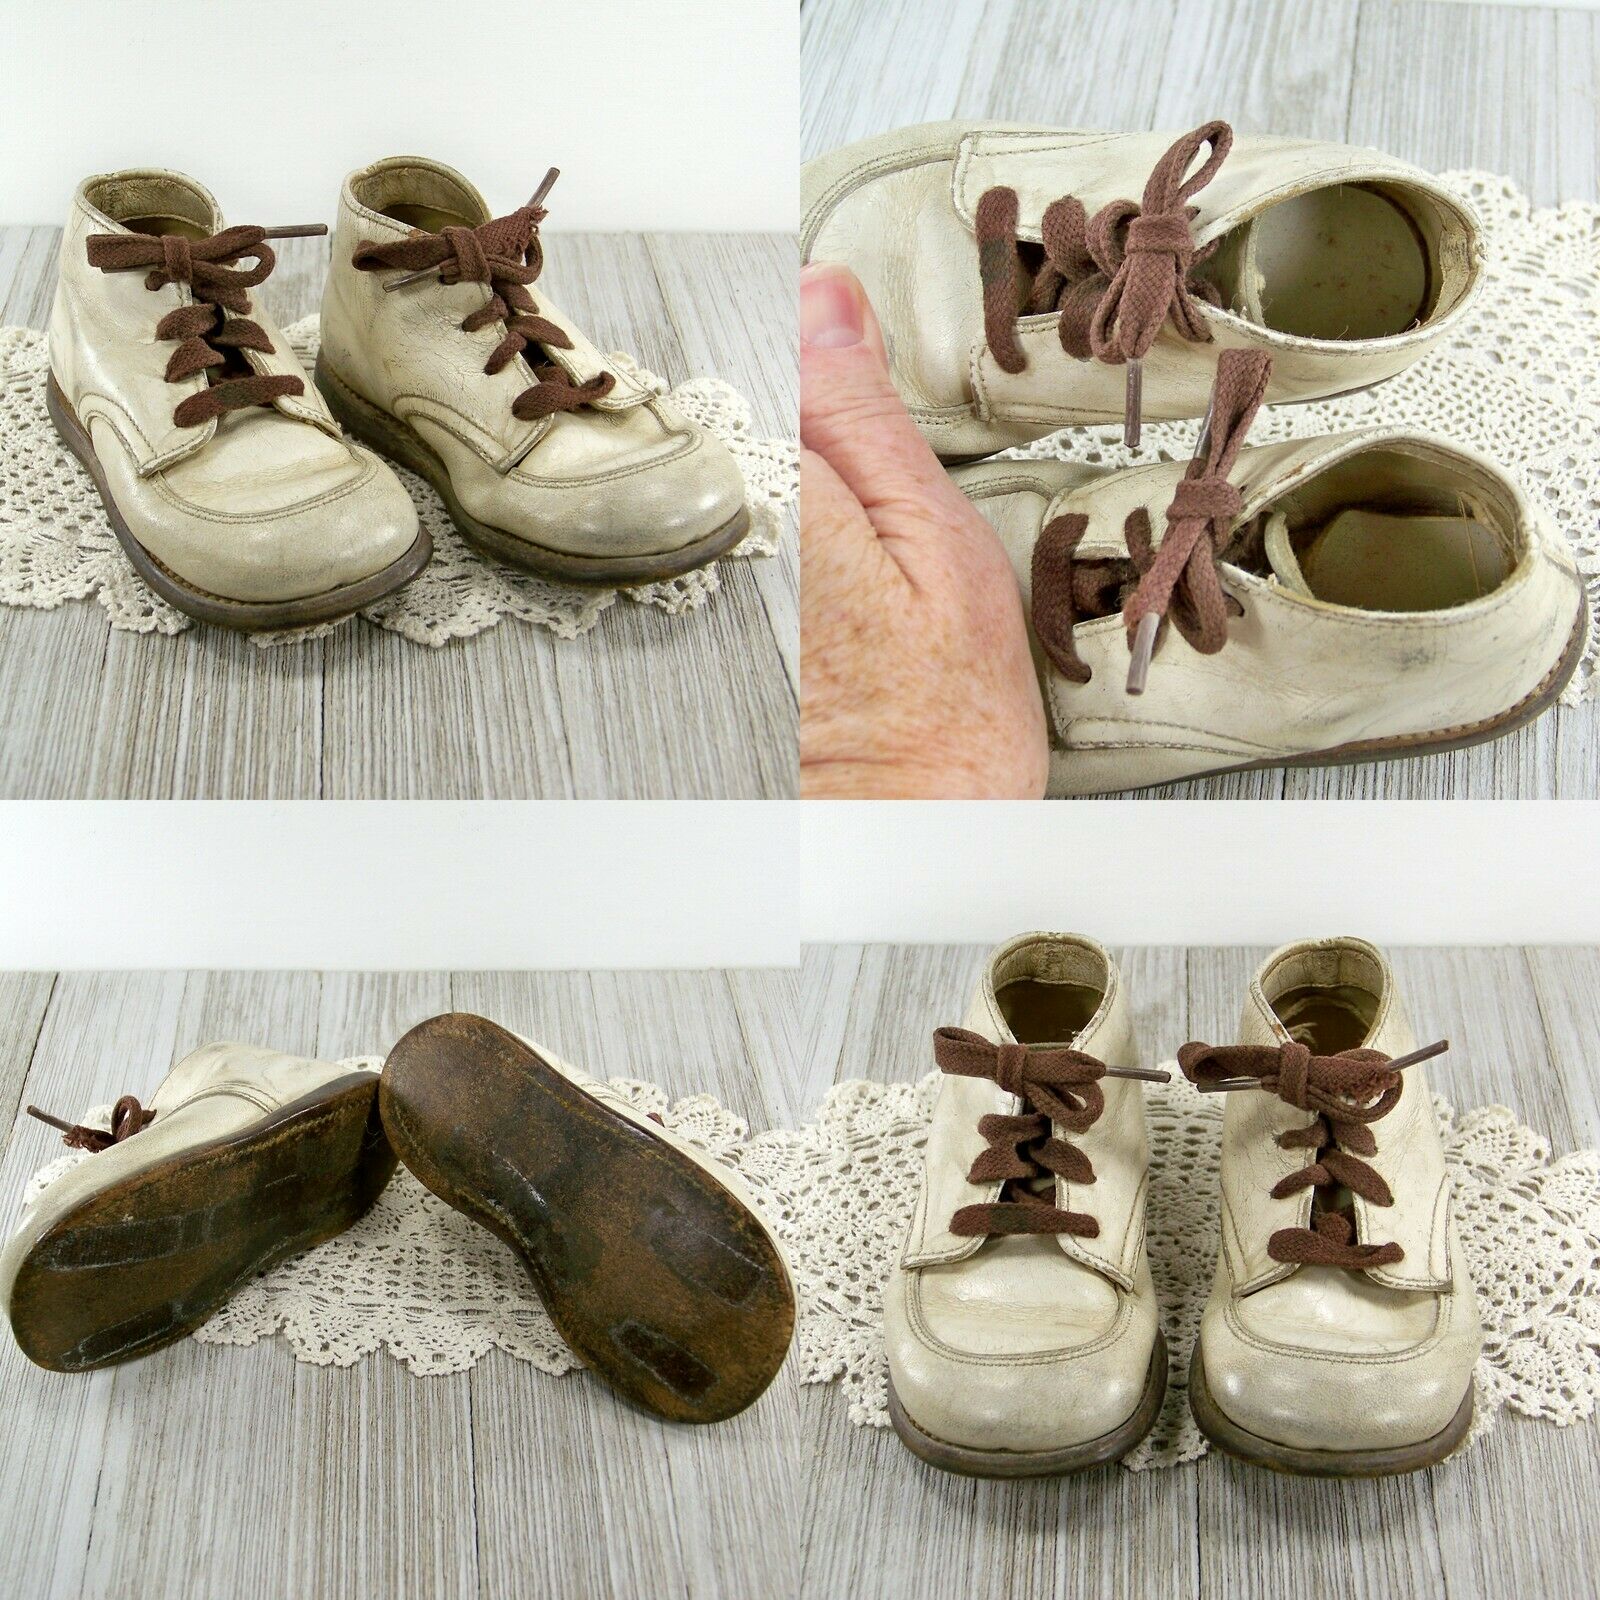 VTG 50s-60s White Hard Sole Baby Walking Shoes Brown Shoestrings 5 3/4-in US 8